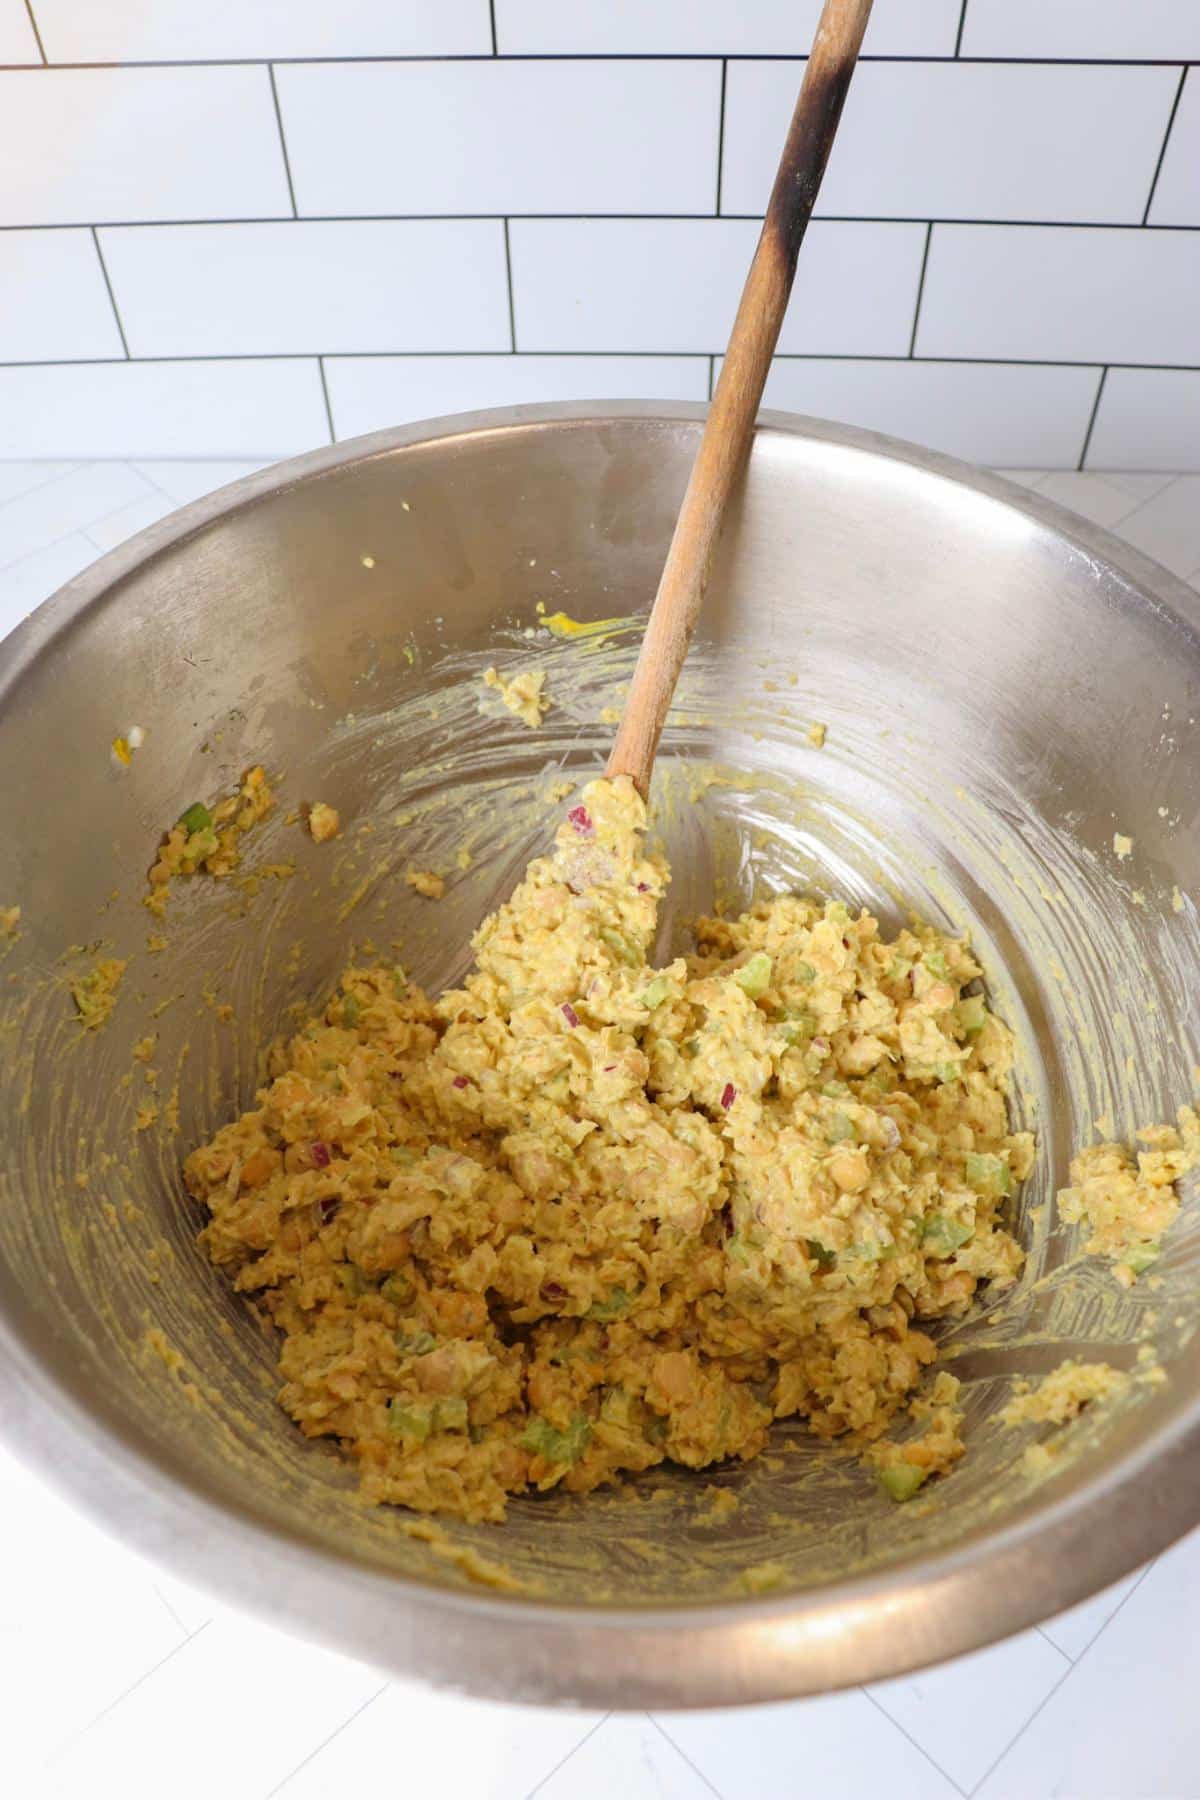 Chickpea salad sandwich ingredients in a mixing bowl after getting mixed together with a wooden spoon.